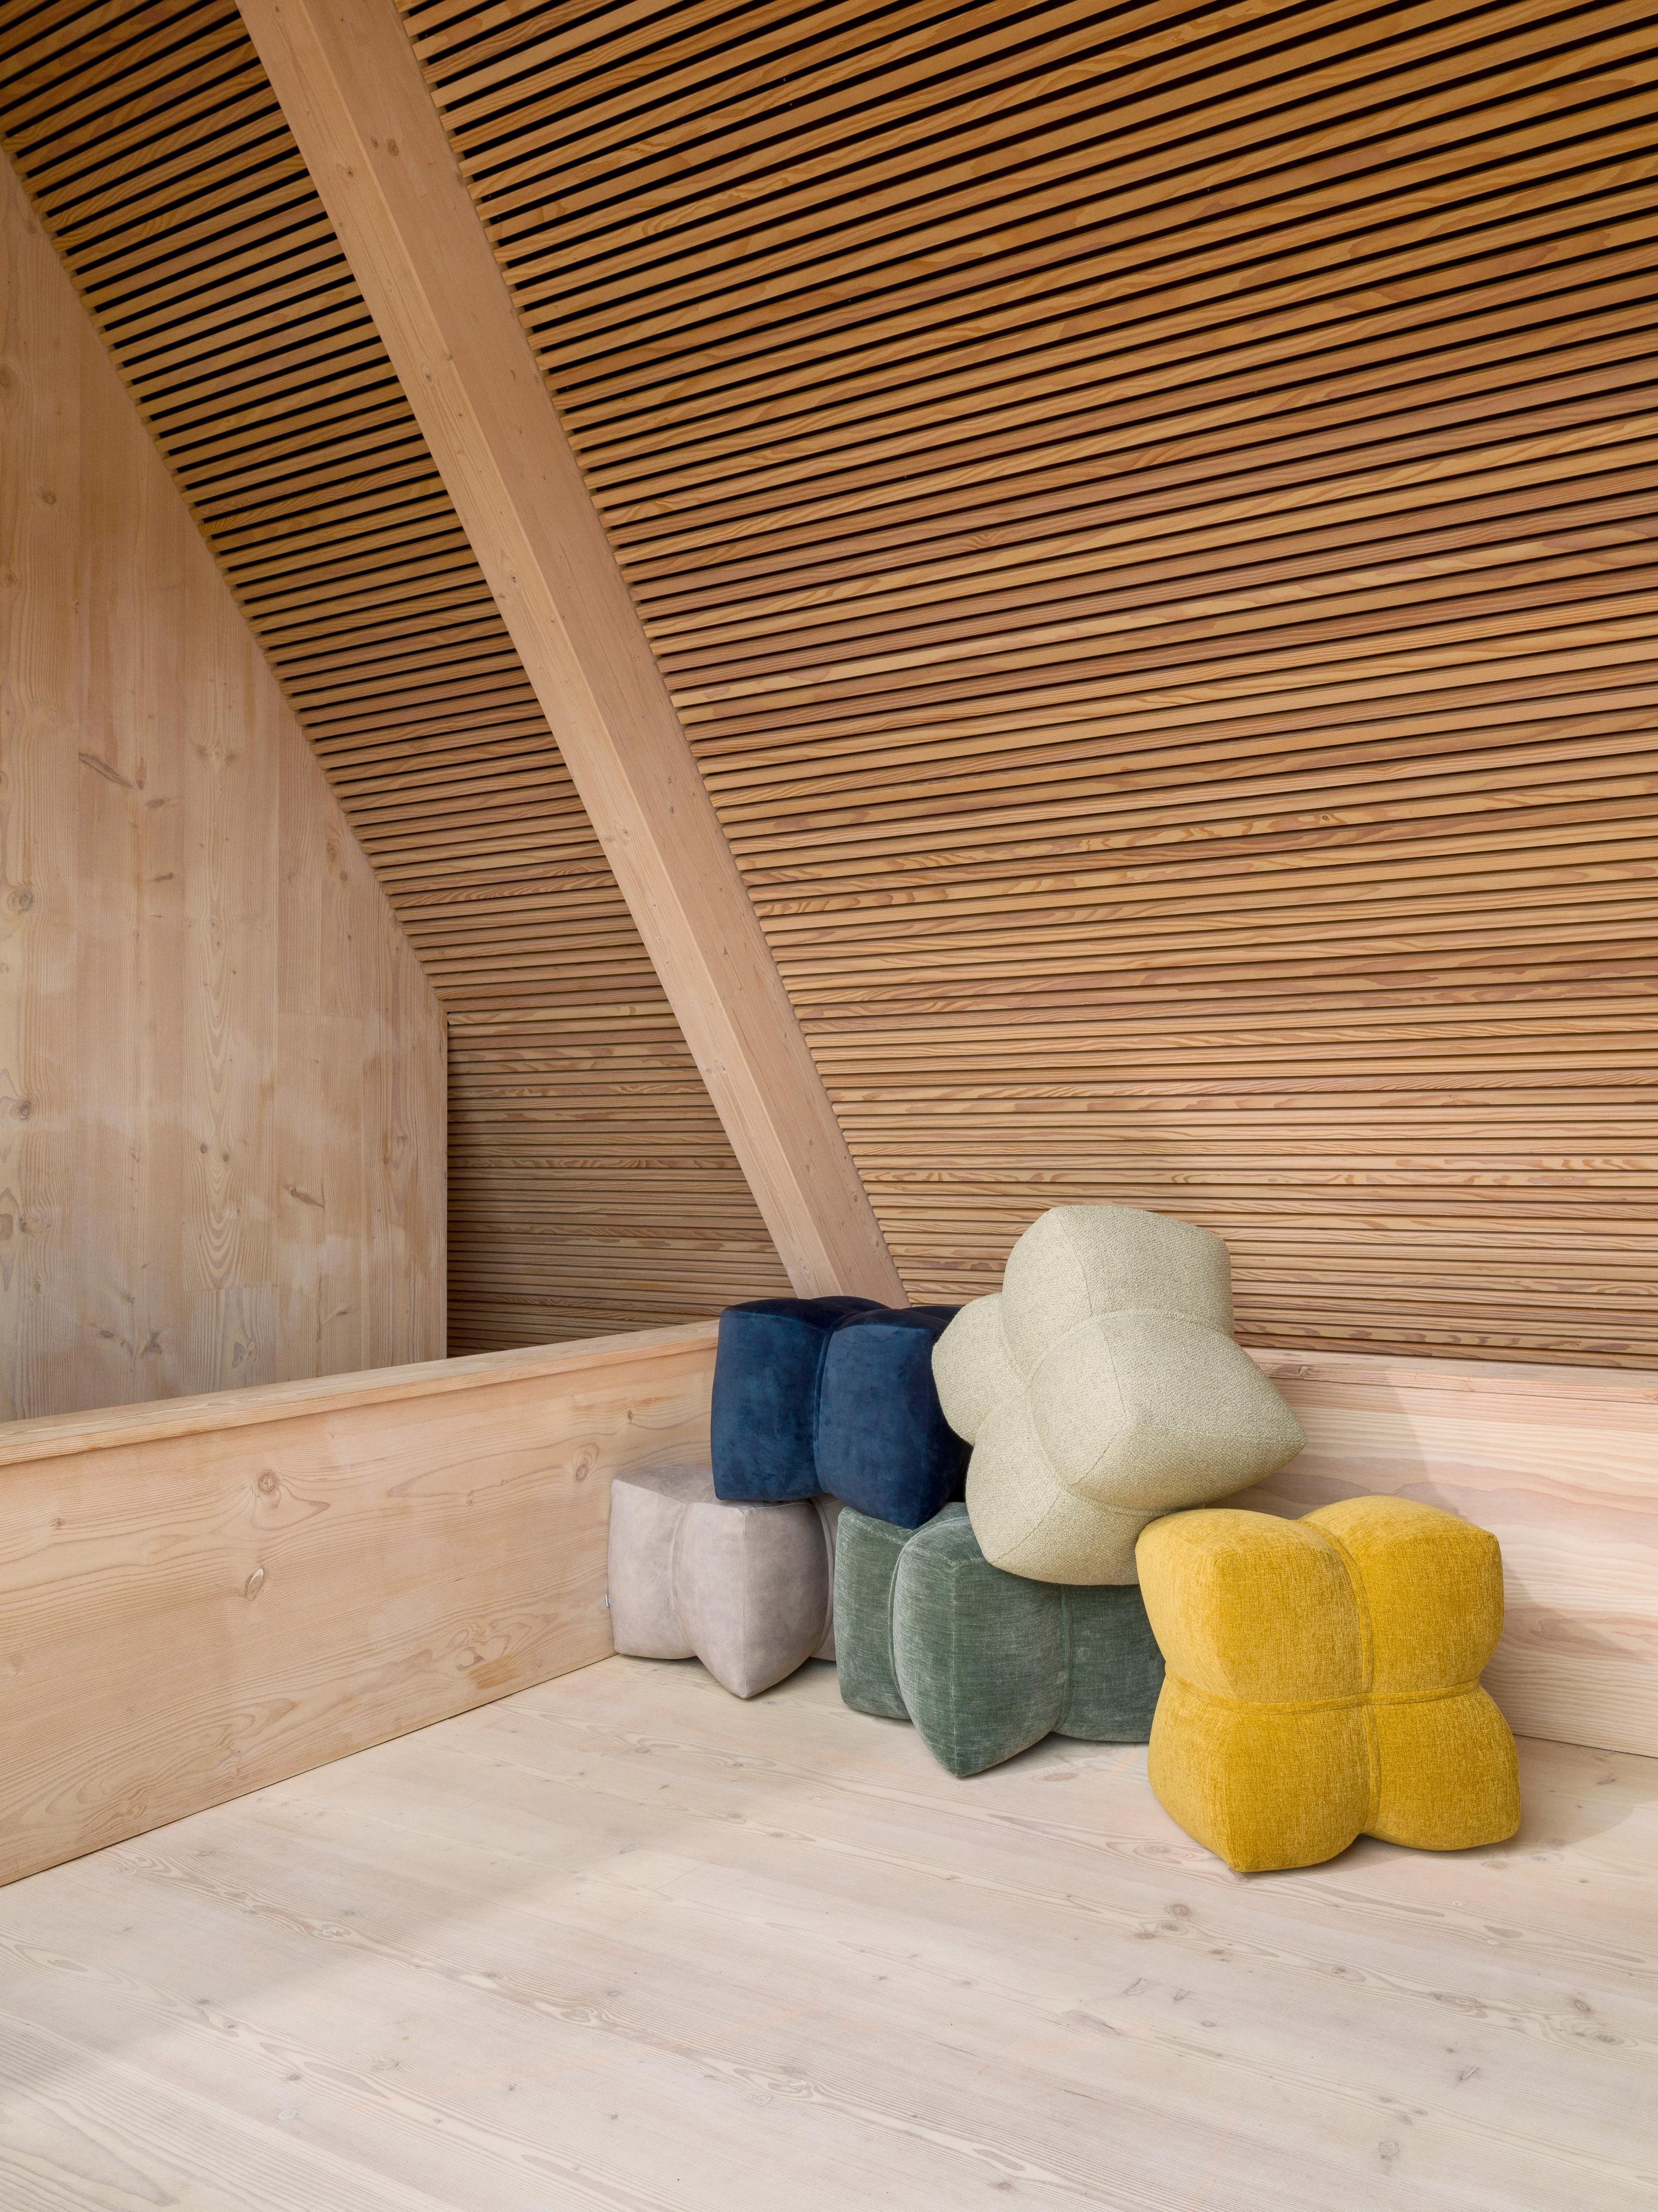 Several Nawabari pouffes upholstered in Ravello, Napoli, Tomelilla and Lazio fabrics sit in the corner of a wooden room.